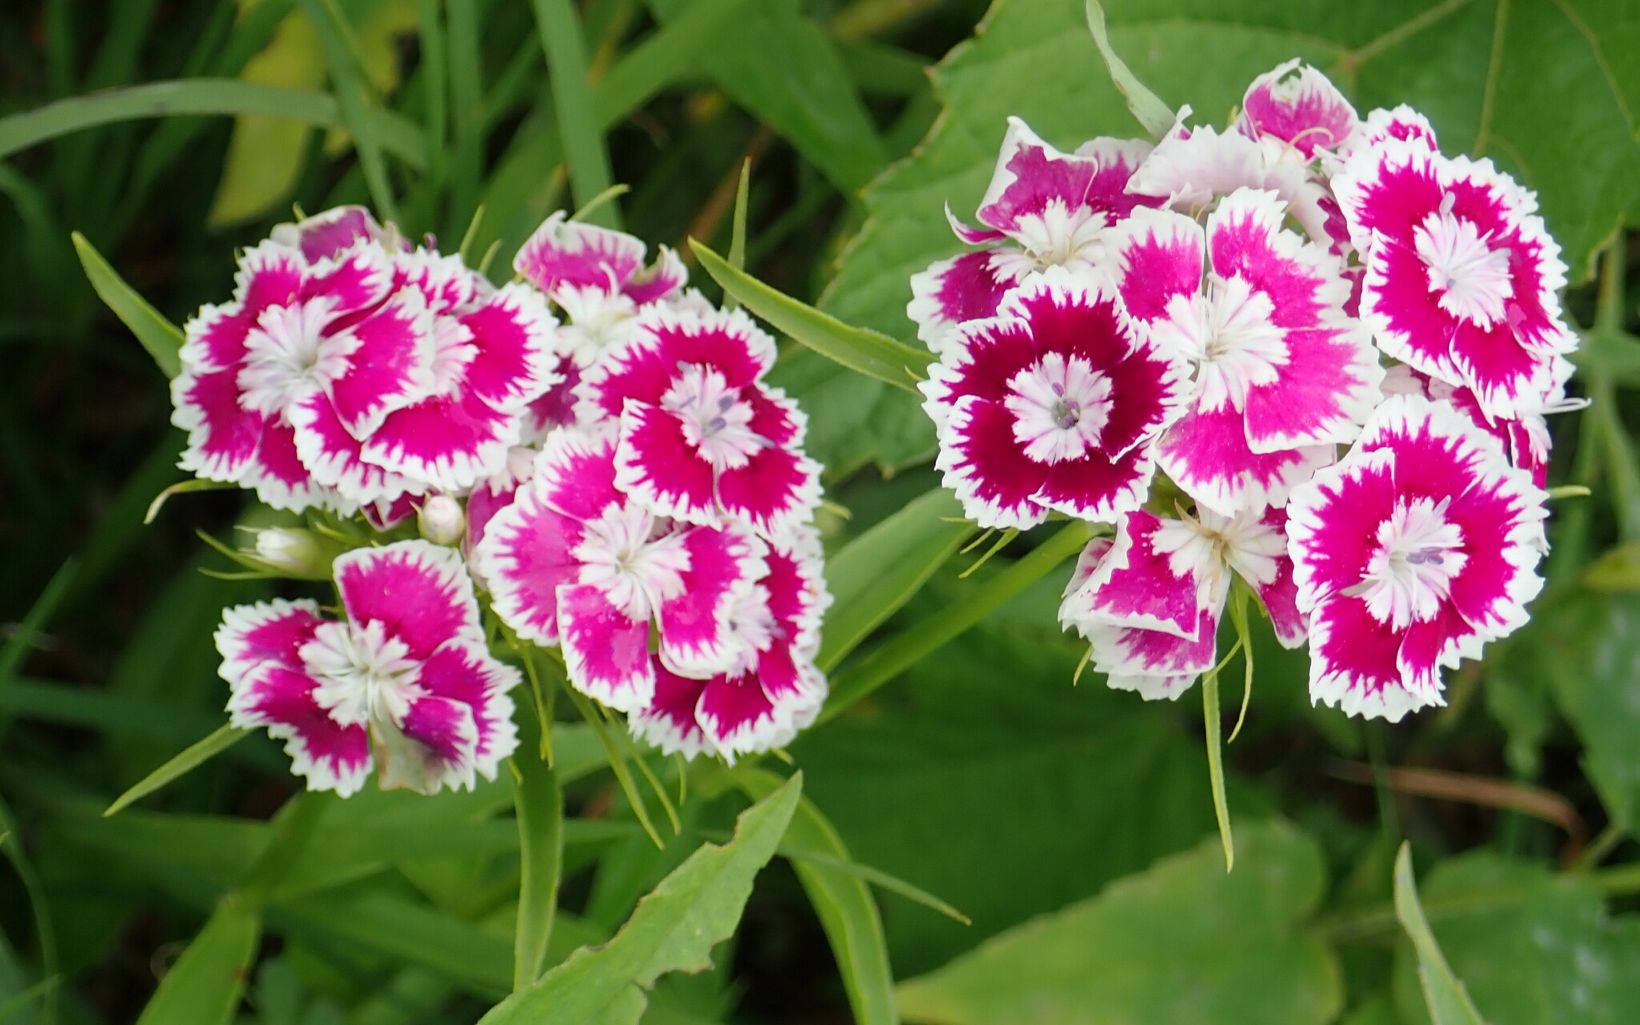 Two clumps of flowers with a hot pink and white ruffled pattern on the petals.